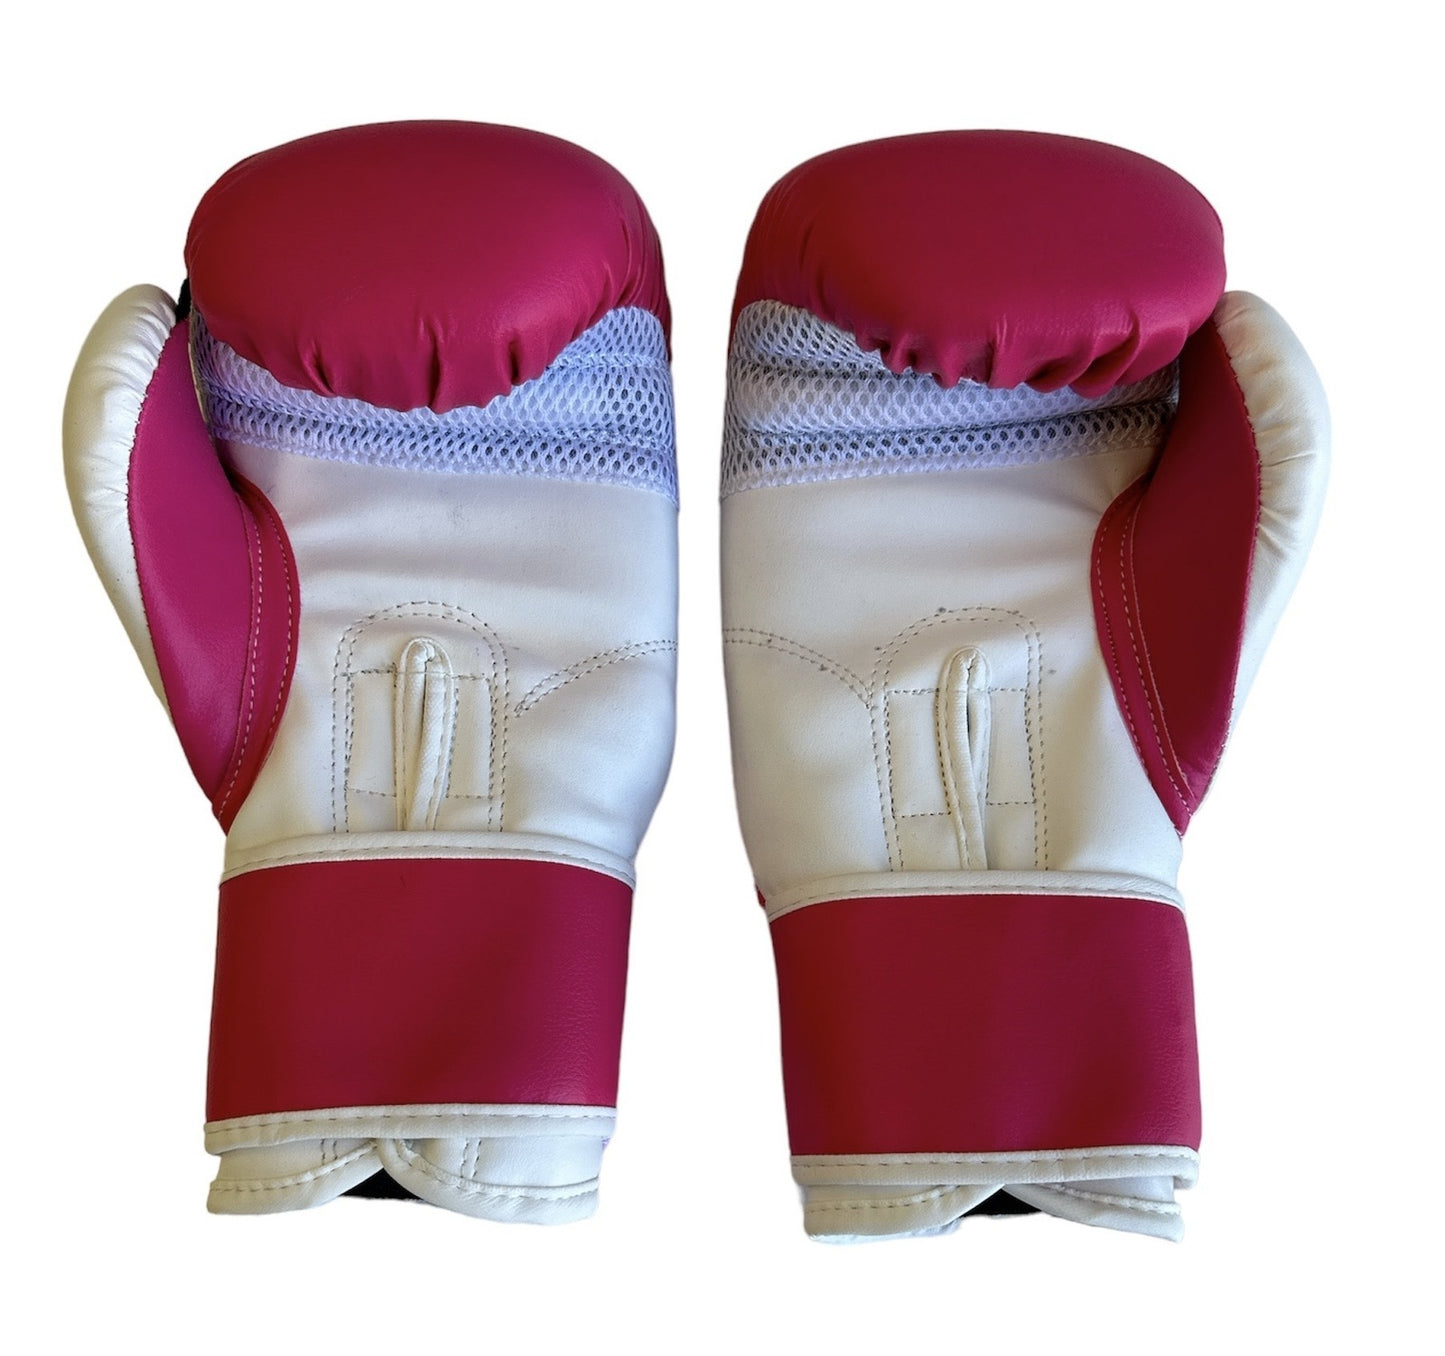 Rock Set of 2 Boxing Gloves MMA Training Fight Punch Bag Sparring Kickboxing 10oz